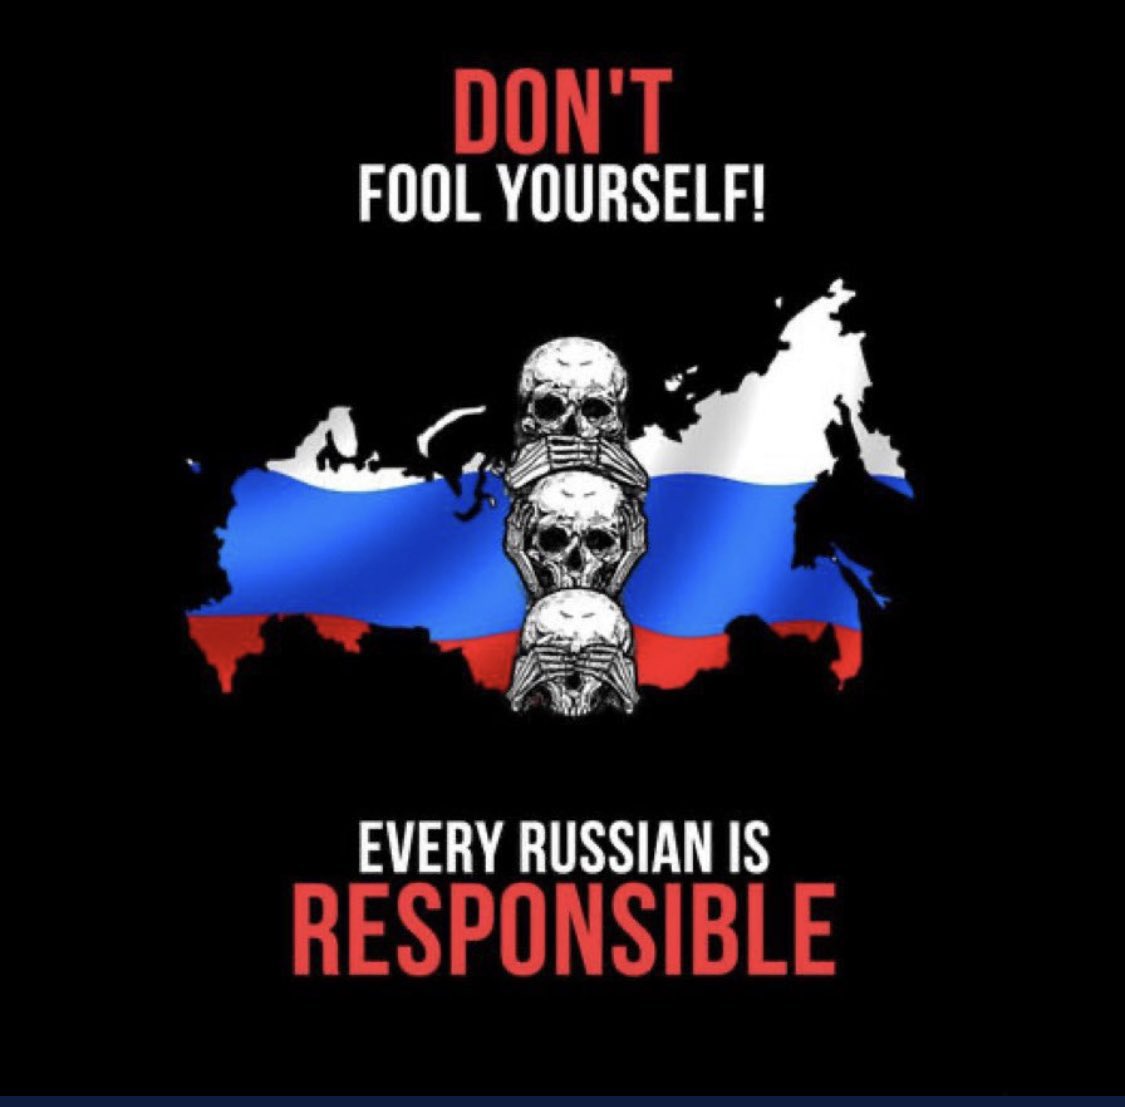 Ok fellas and all sane people out there. Lets get this retweeted arround the world, all time zones, make a big Laola wave with the following words:

#russiaisateroriststate 

Follow each #NAFOfella you see on your way. Find new fellas. #OneTeamOneFight 

Слава Україні!